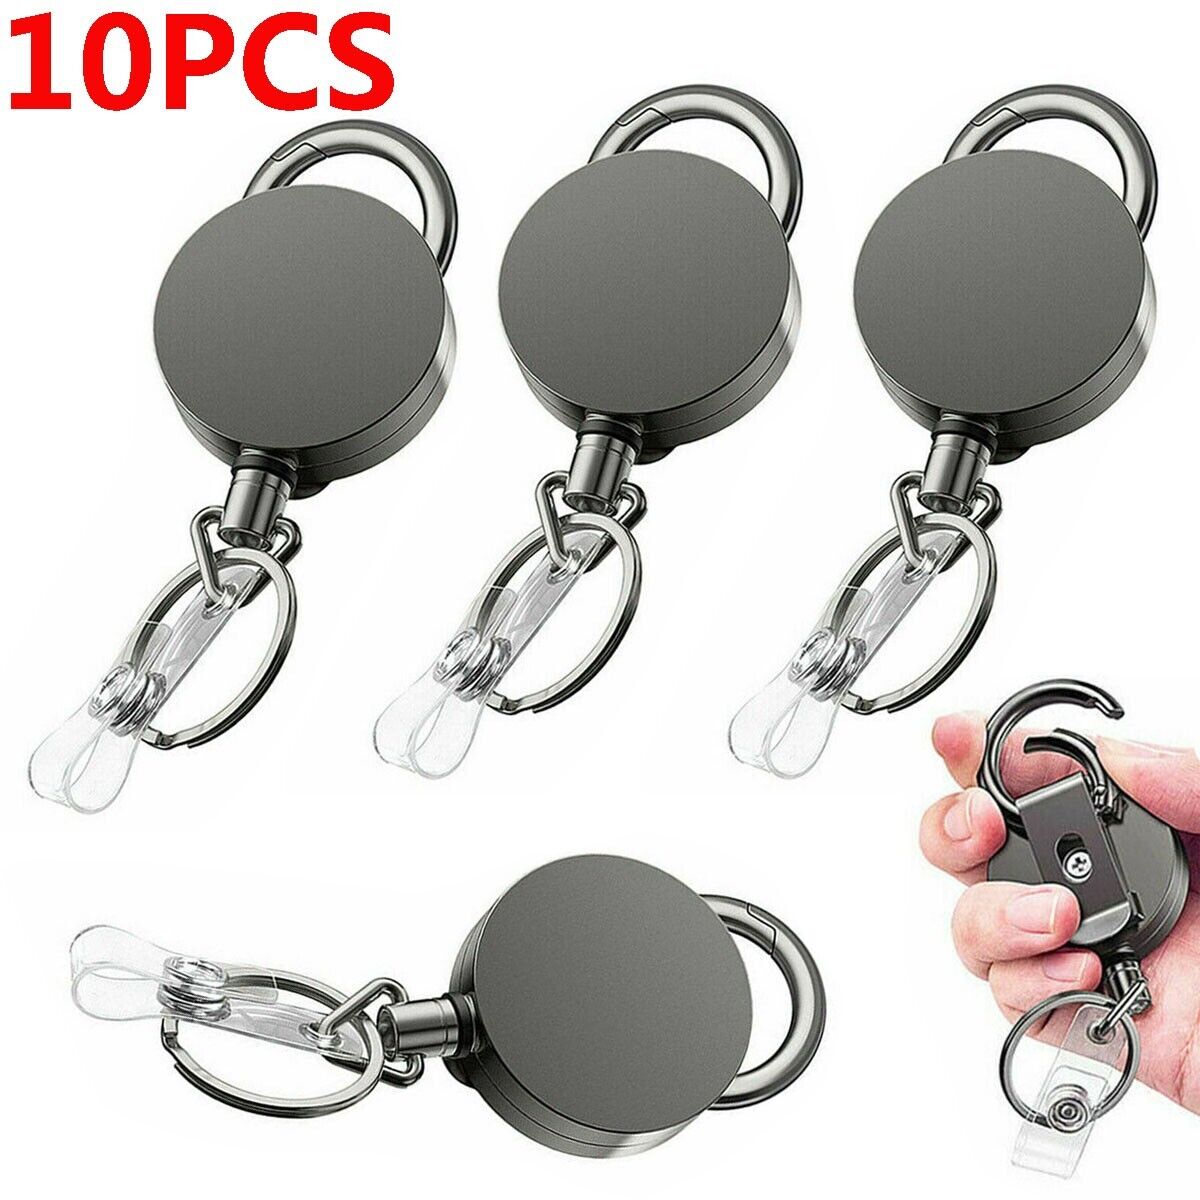 10Pcs Retractable Heavy Duty Pull Ring Key Chain Recoil Keyring Wire Rope Holder